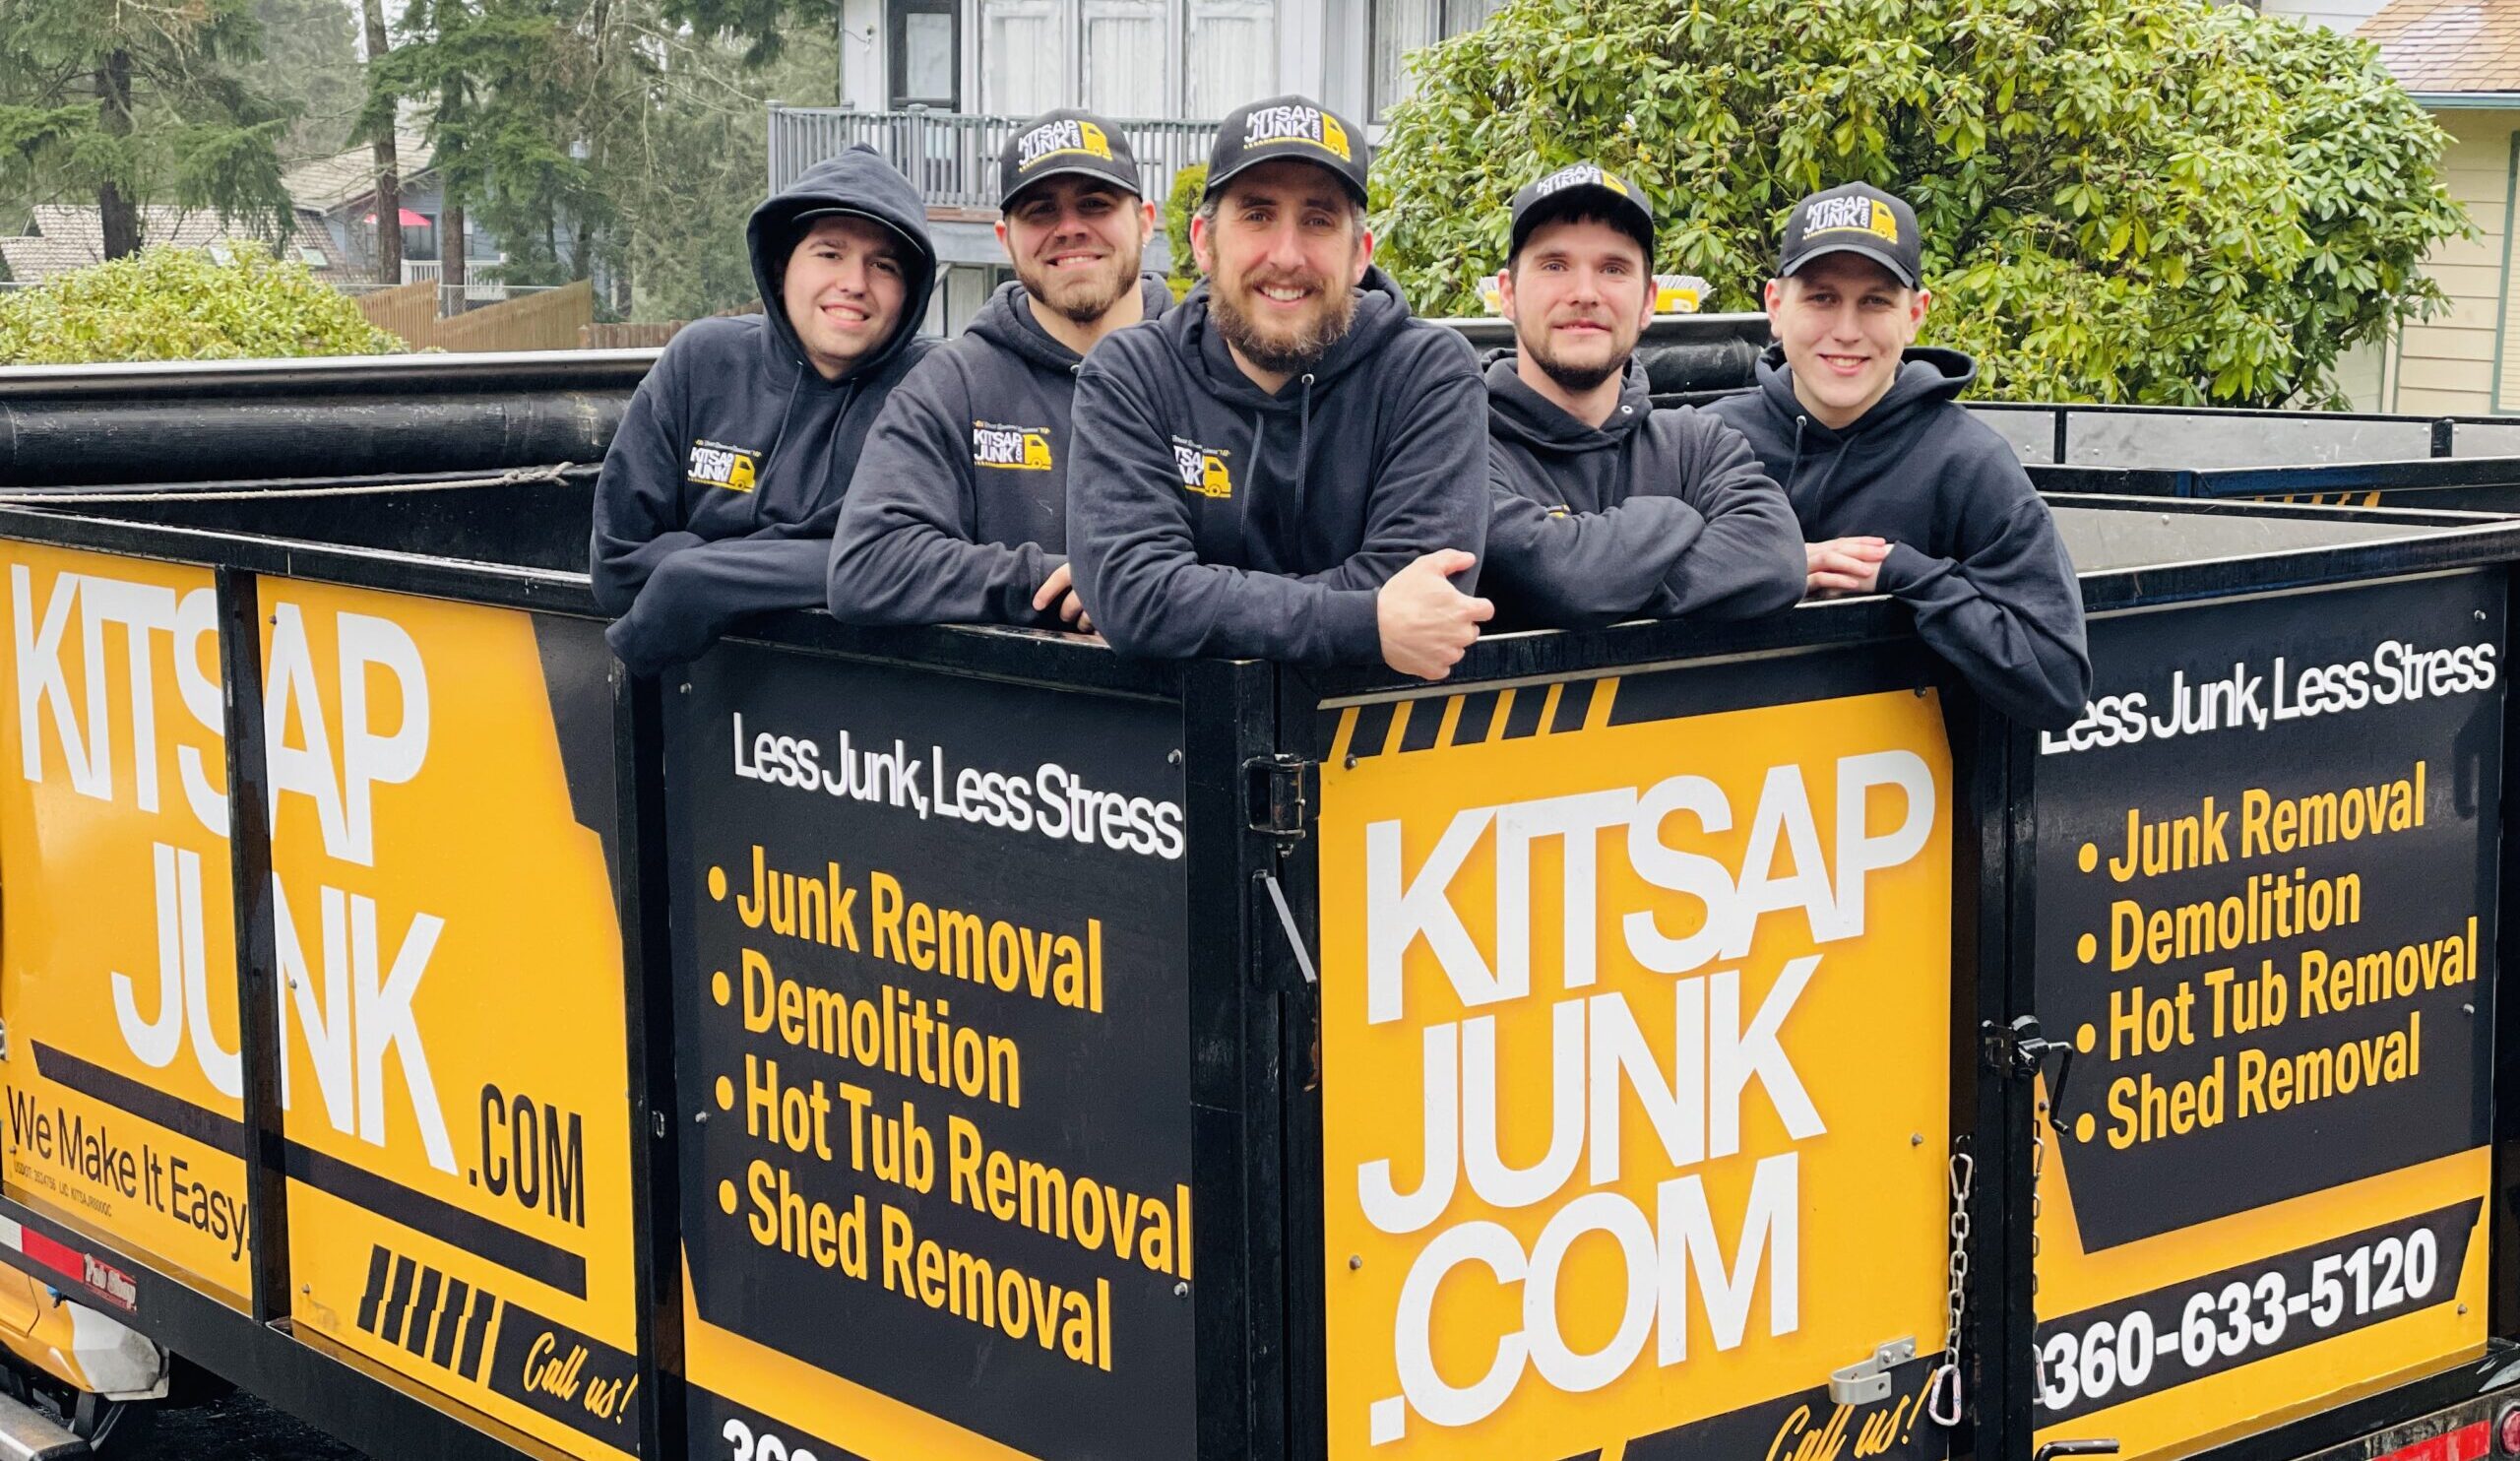 Kitsap Junk Removal crew posing in the back of the truck